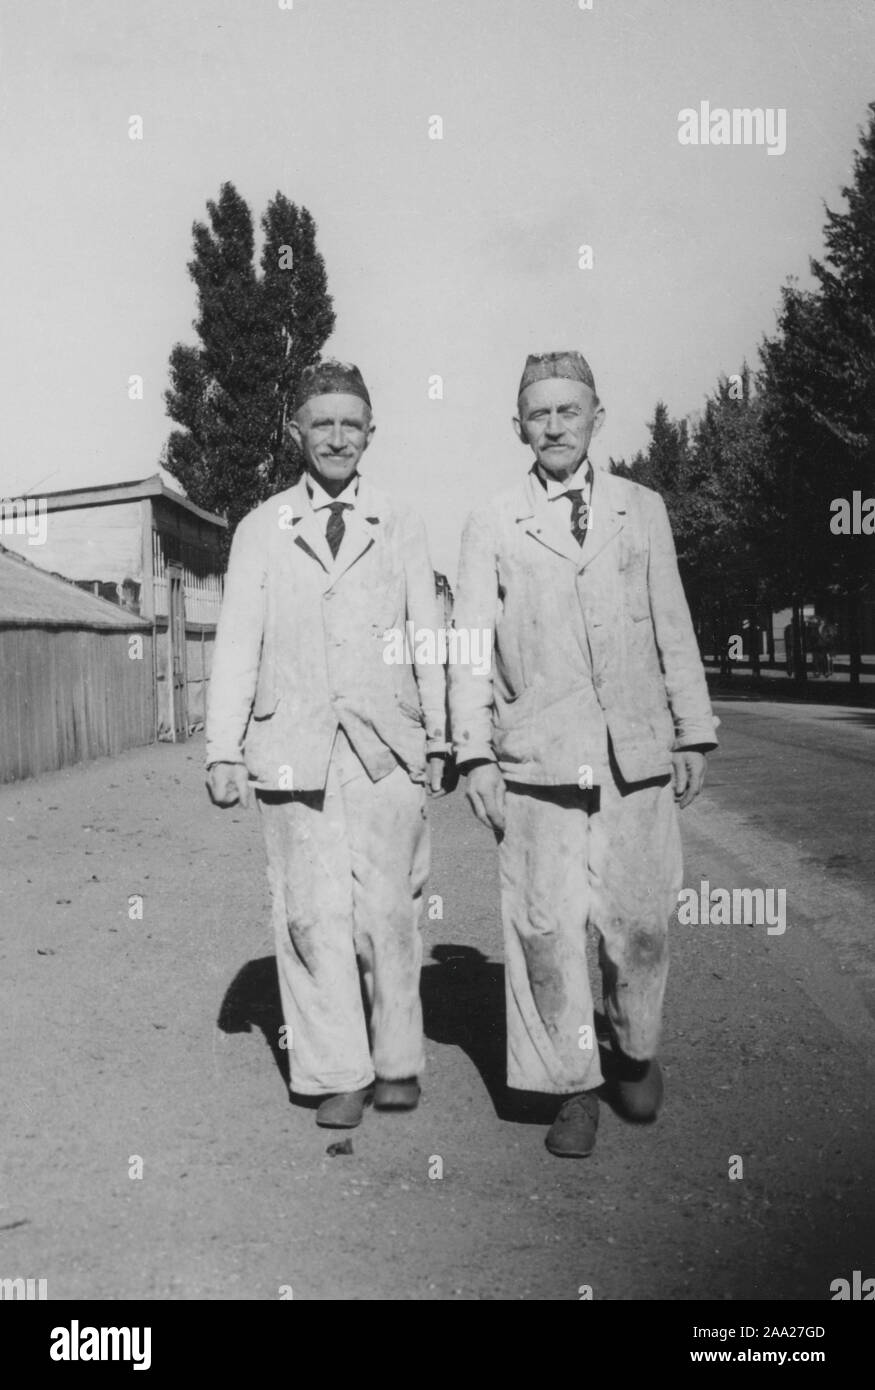 Identical twins. The brothers Erik and Otto Nilsson from Malmö walking down the street. Dressed the same. They both work as painters. Sweden 1950s Stock Photo